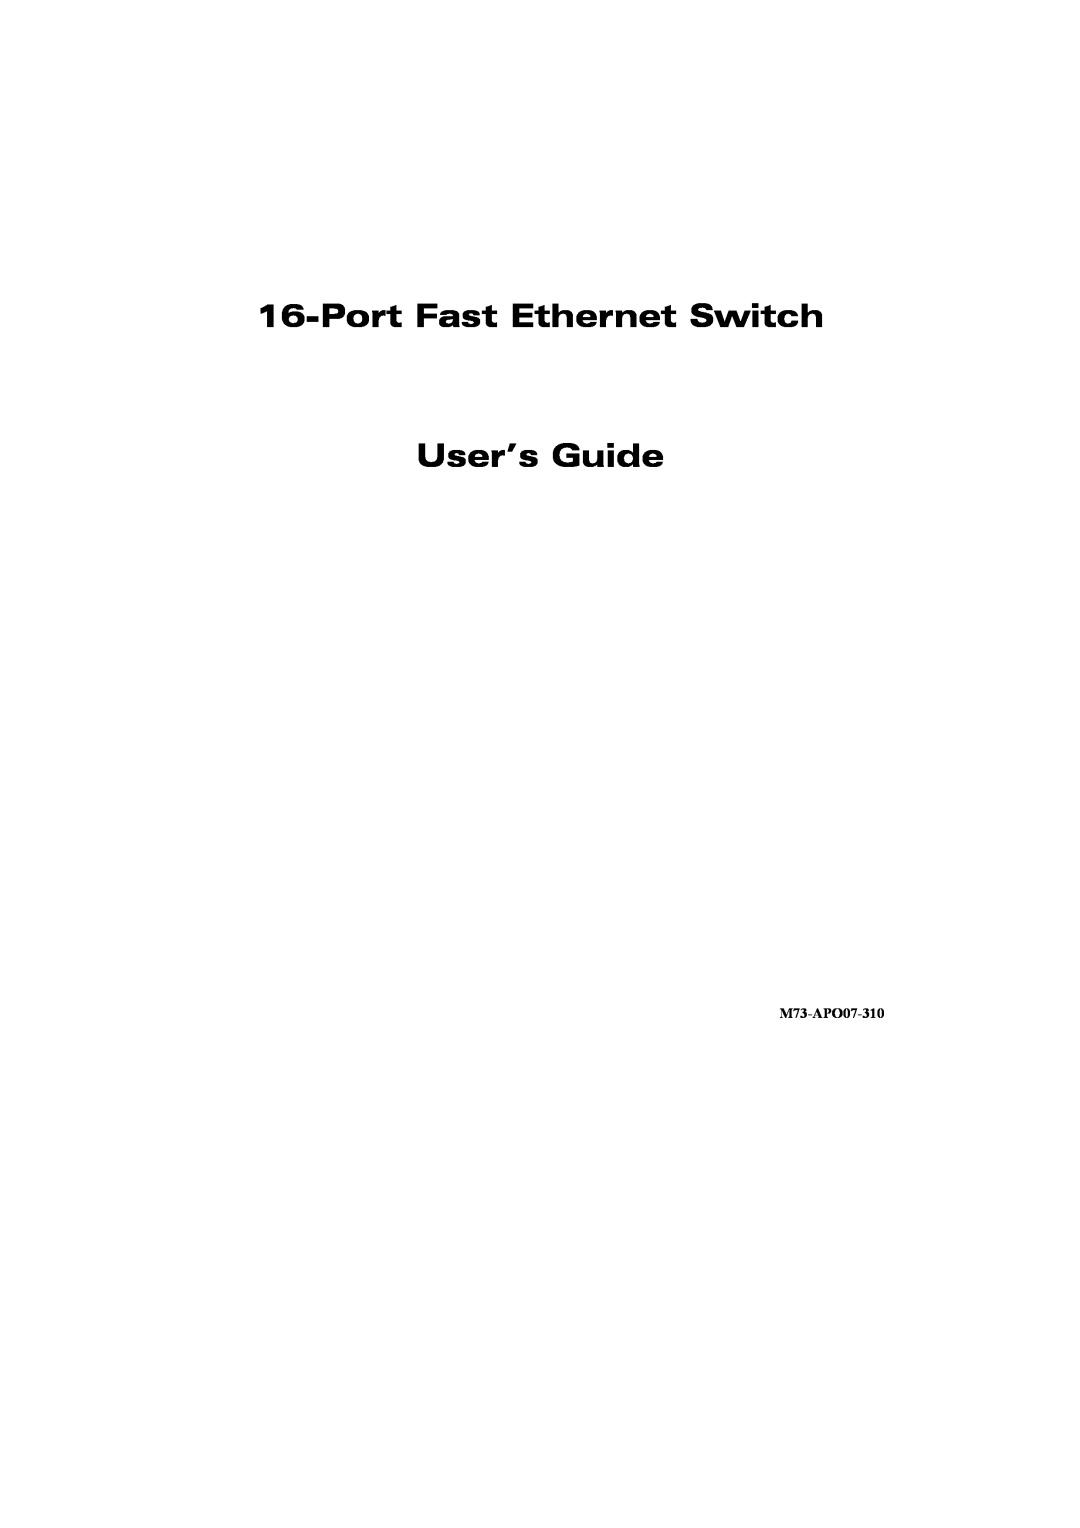 Abocom SW1600B manual Port Fast Ethernet Switch User’s Guide, M73-APO07-310 